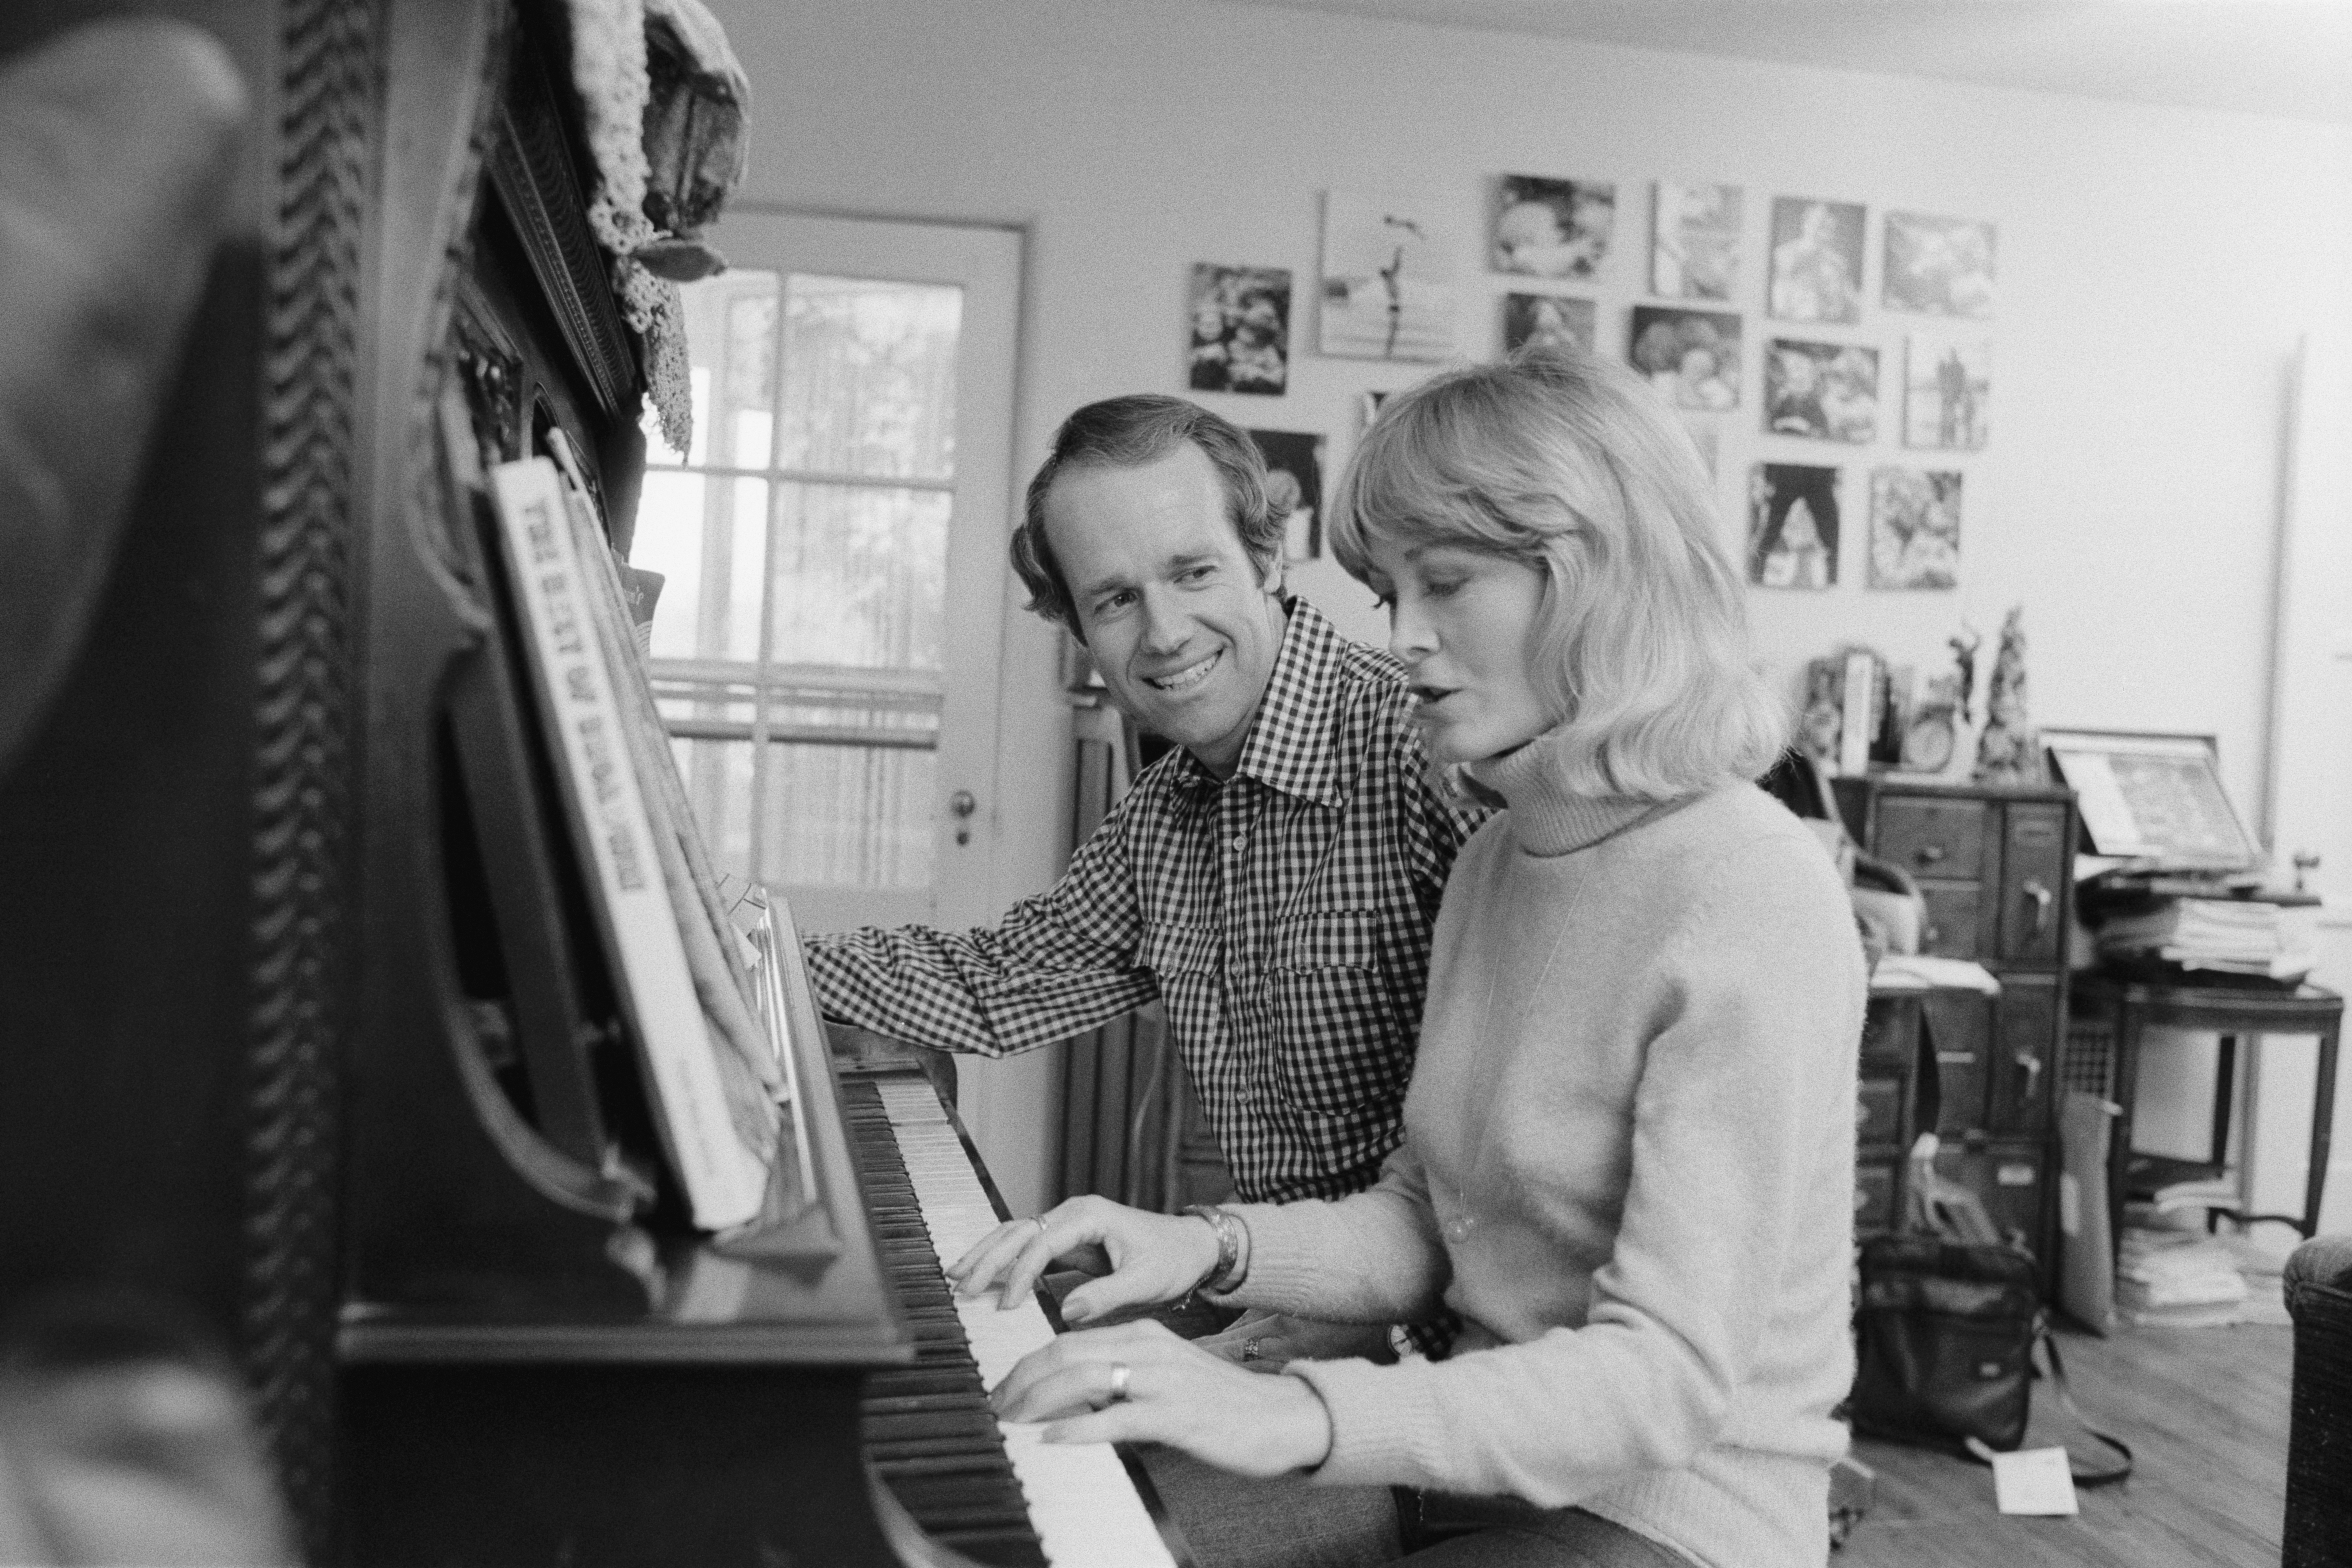 Actor Mike Farrell pictured at home with his wife, actress Judy Farrell | Source: Getty Images